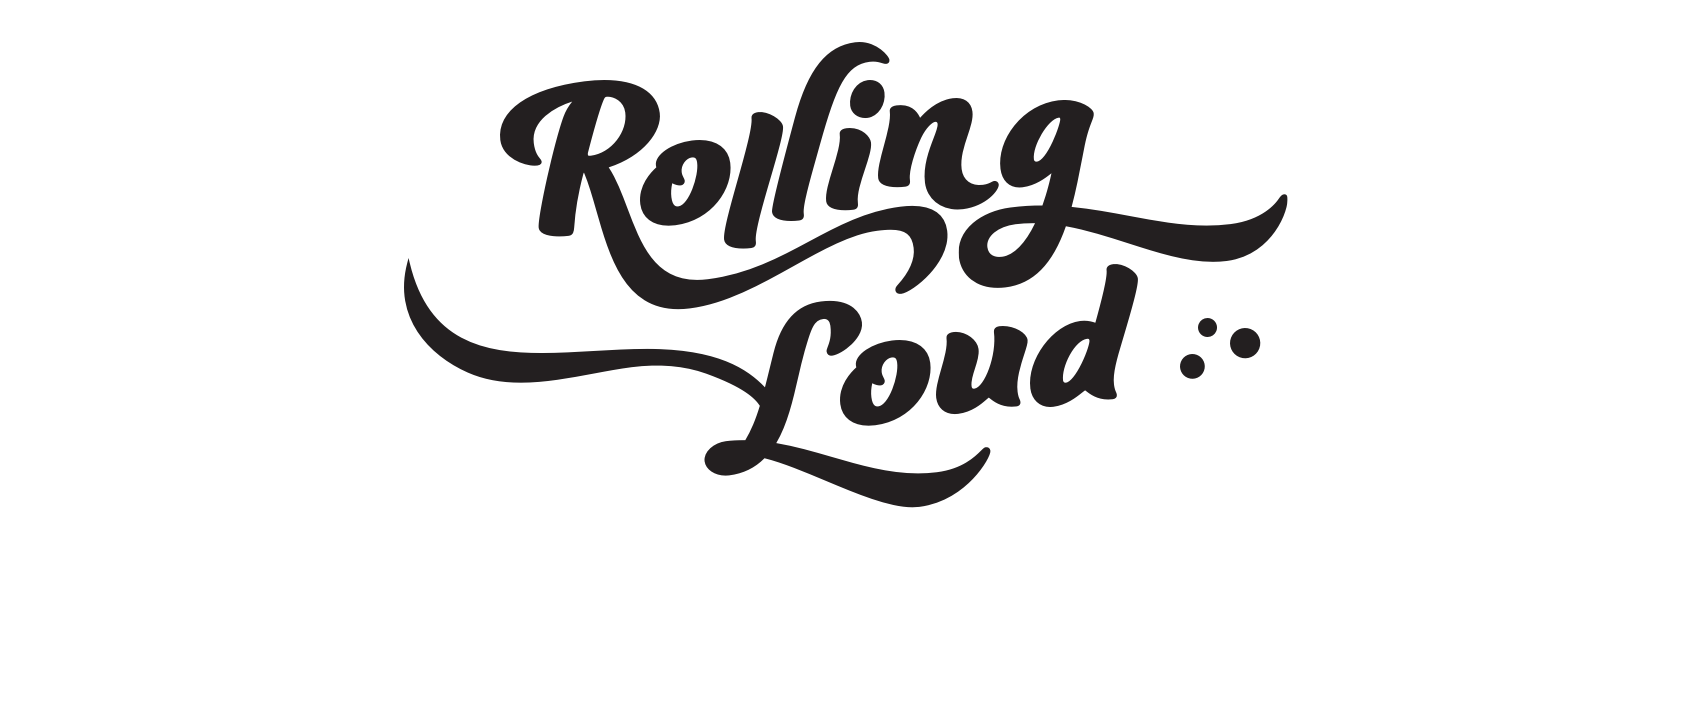 A black and white logo for rolling loud on a white background.